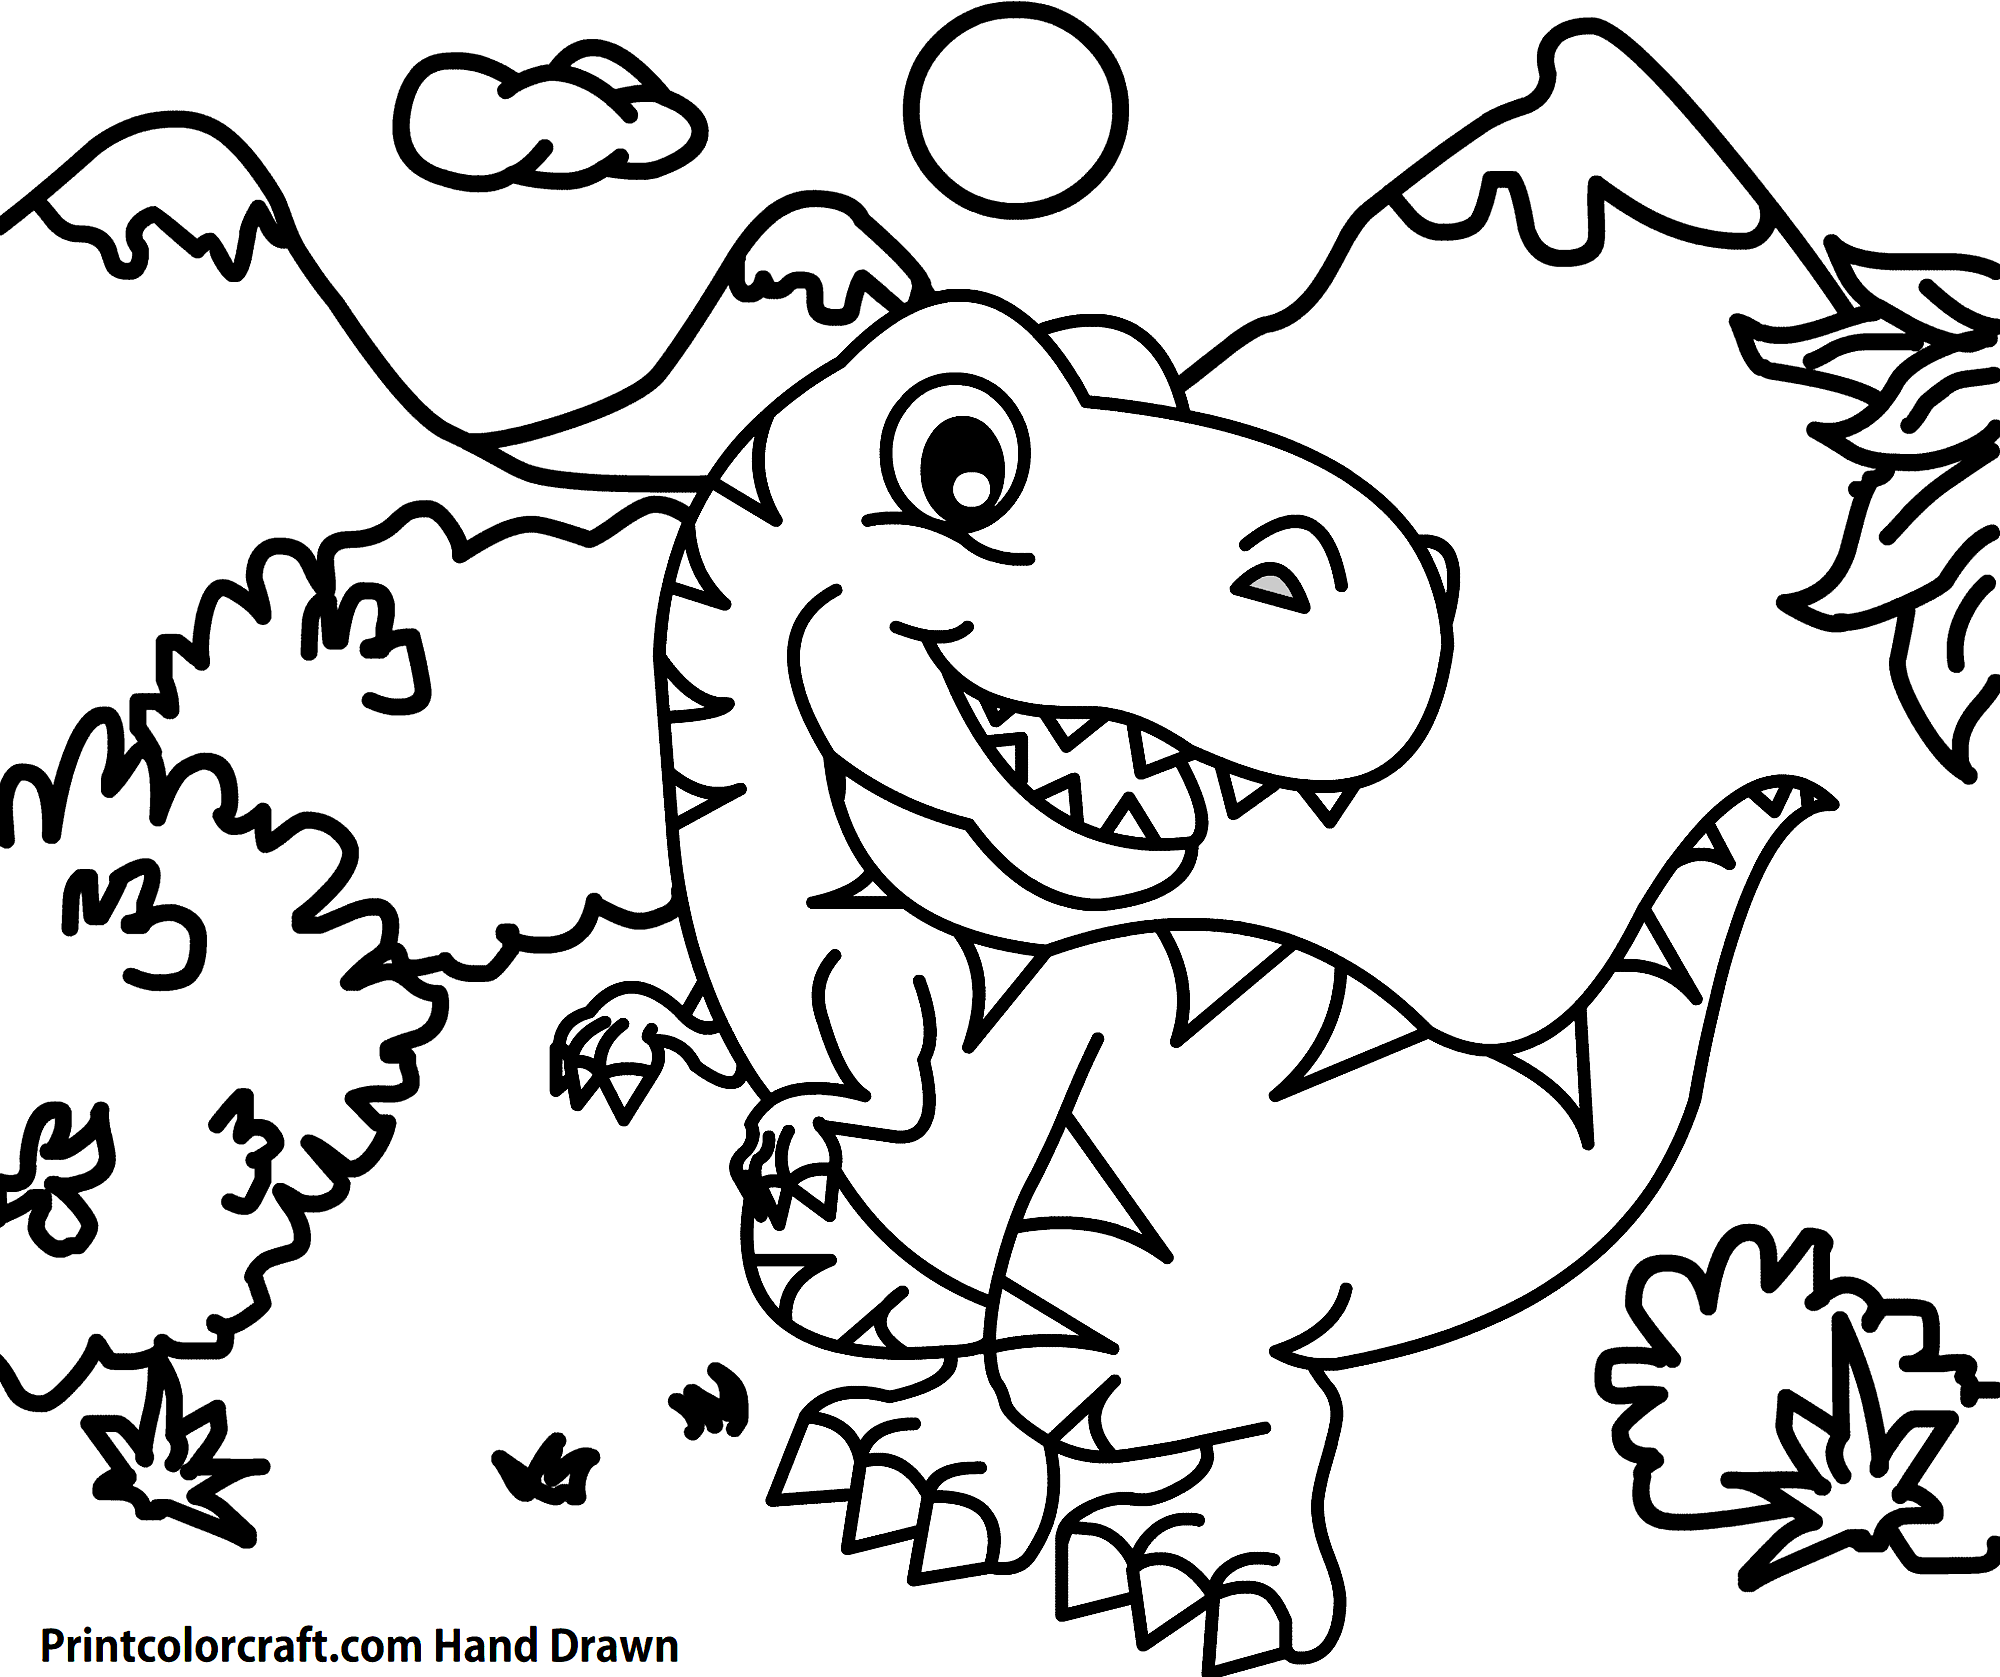 dinosaur-coloring-pages-updated-printable-pdf-print-color-craft